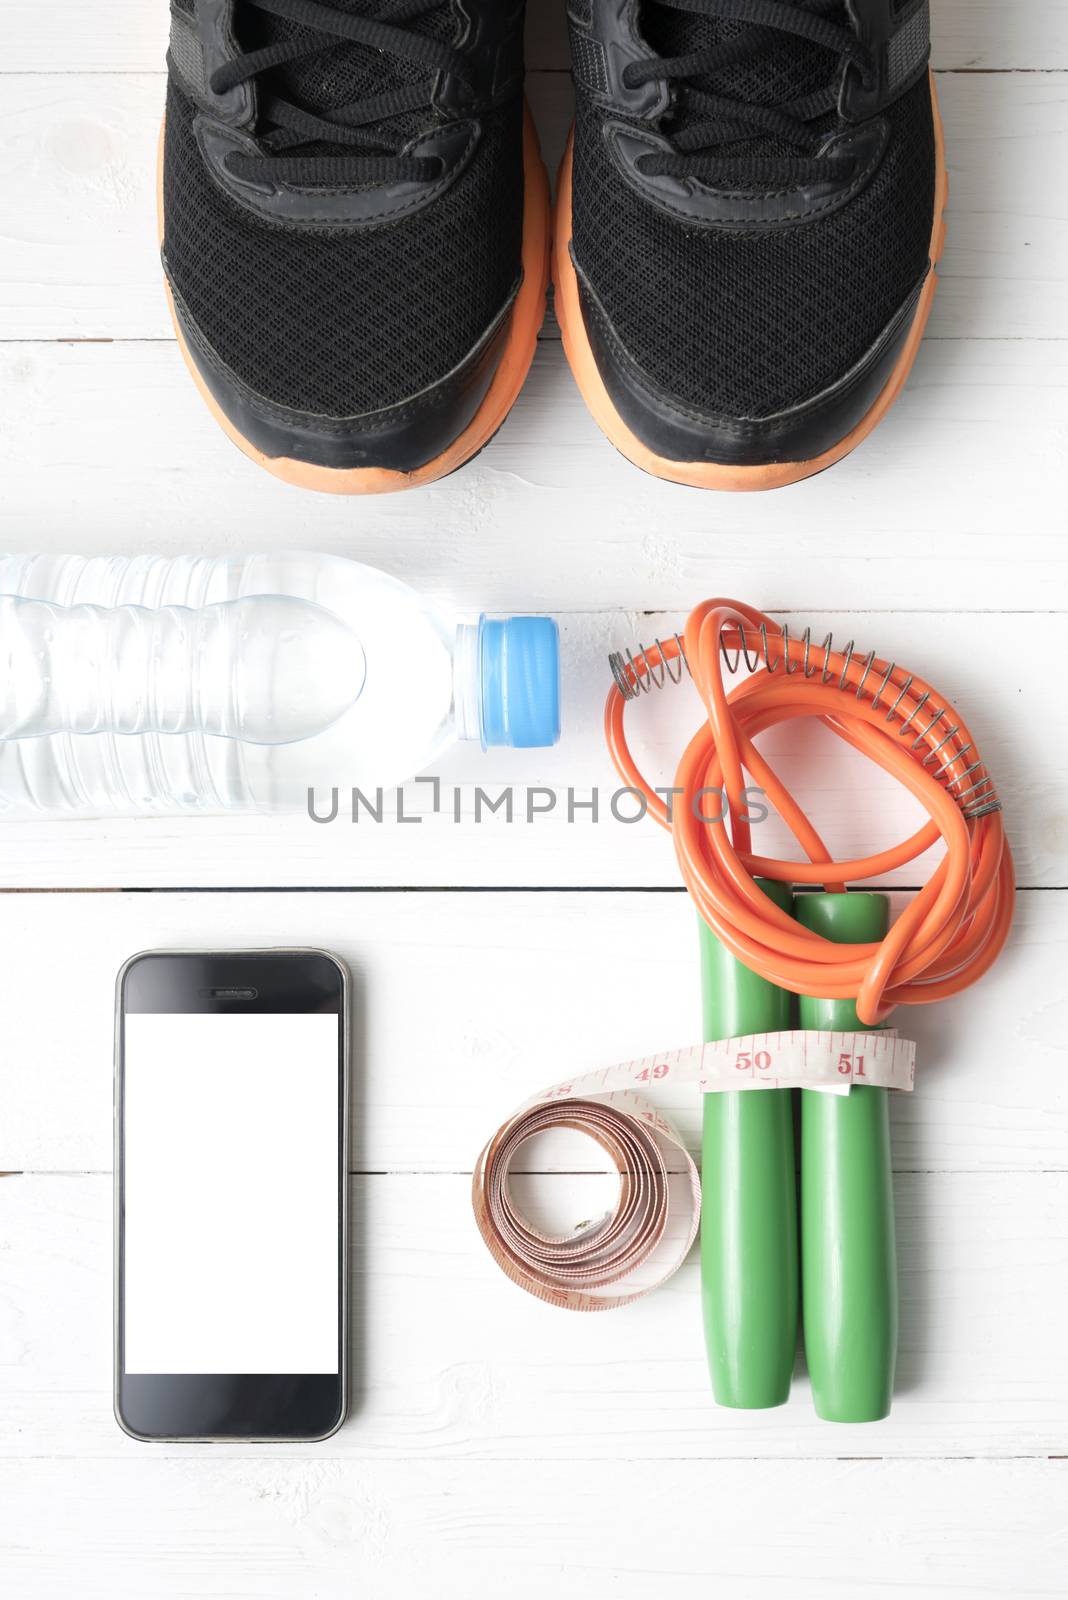 fitness equipment : running shoes,jumping rope,drinking water,measuring tape and phone on white wood table